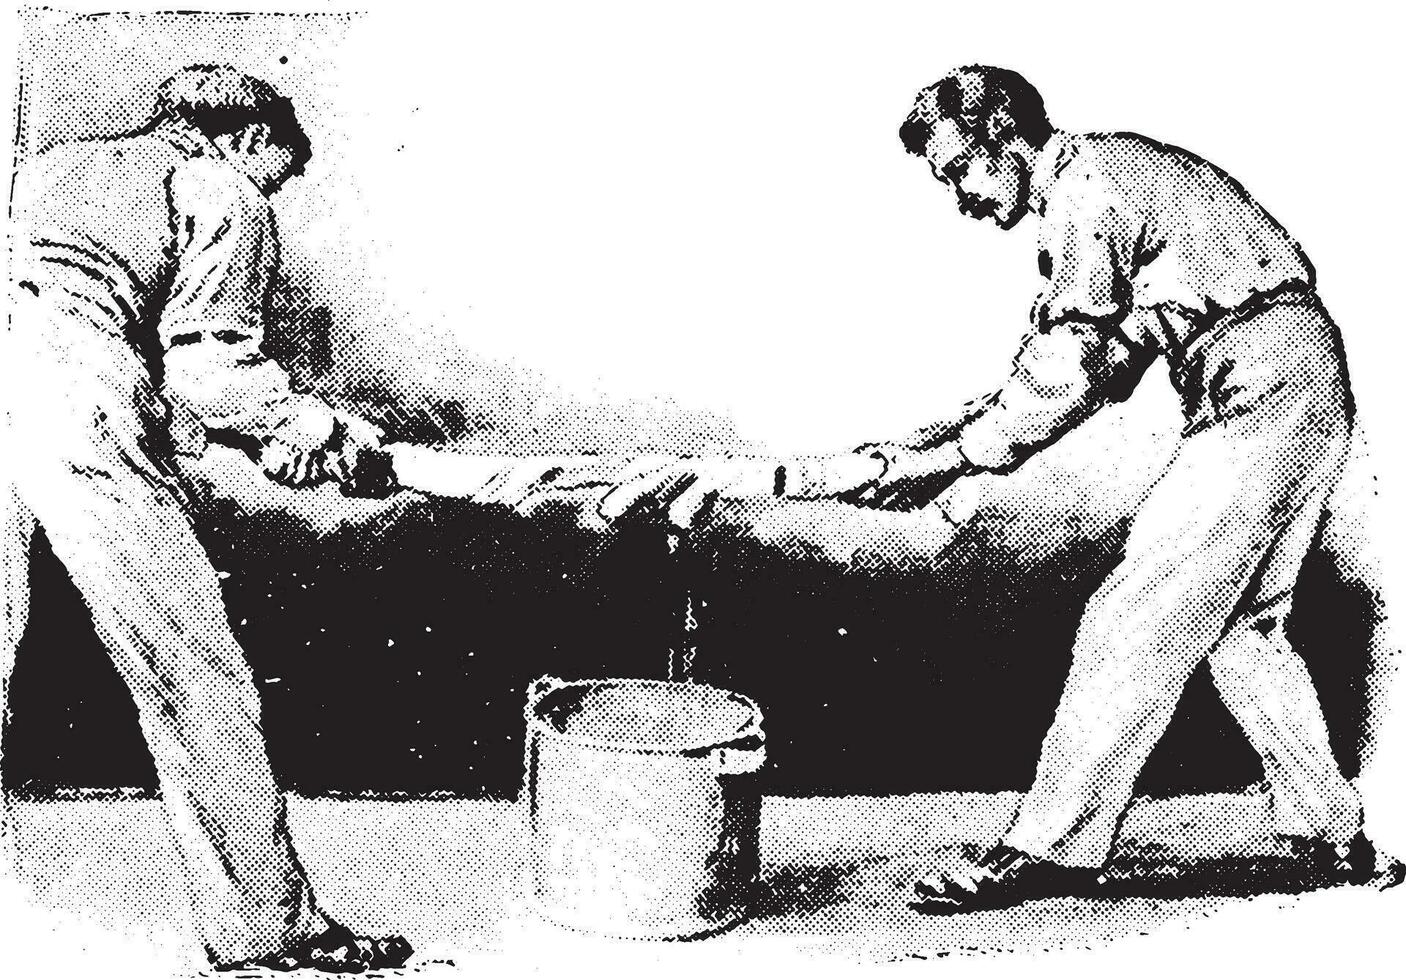 Method of wringing blanket from boiling water by keeping ends dry, vintage engraving. vector